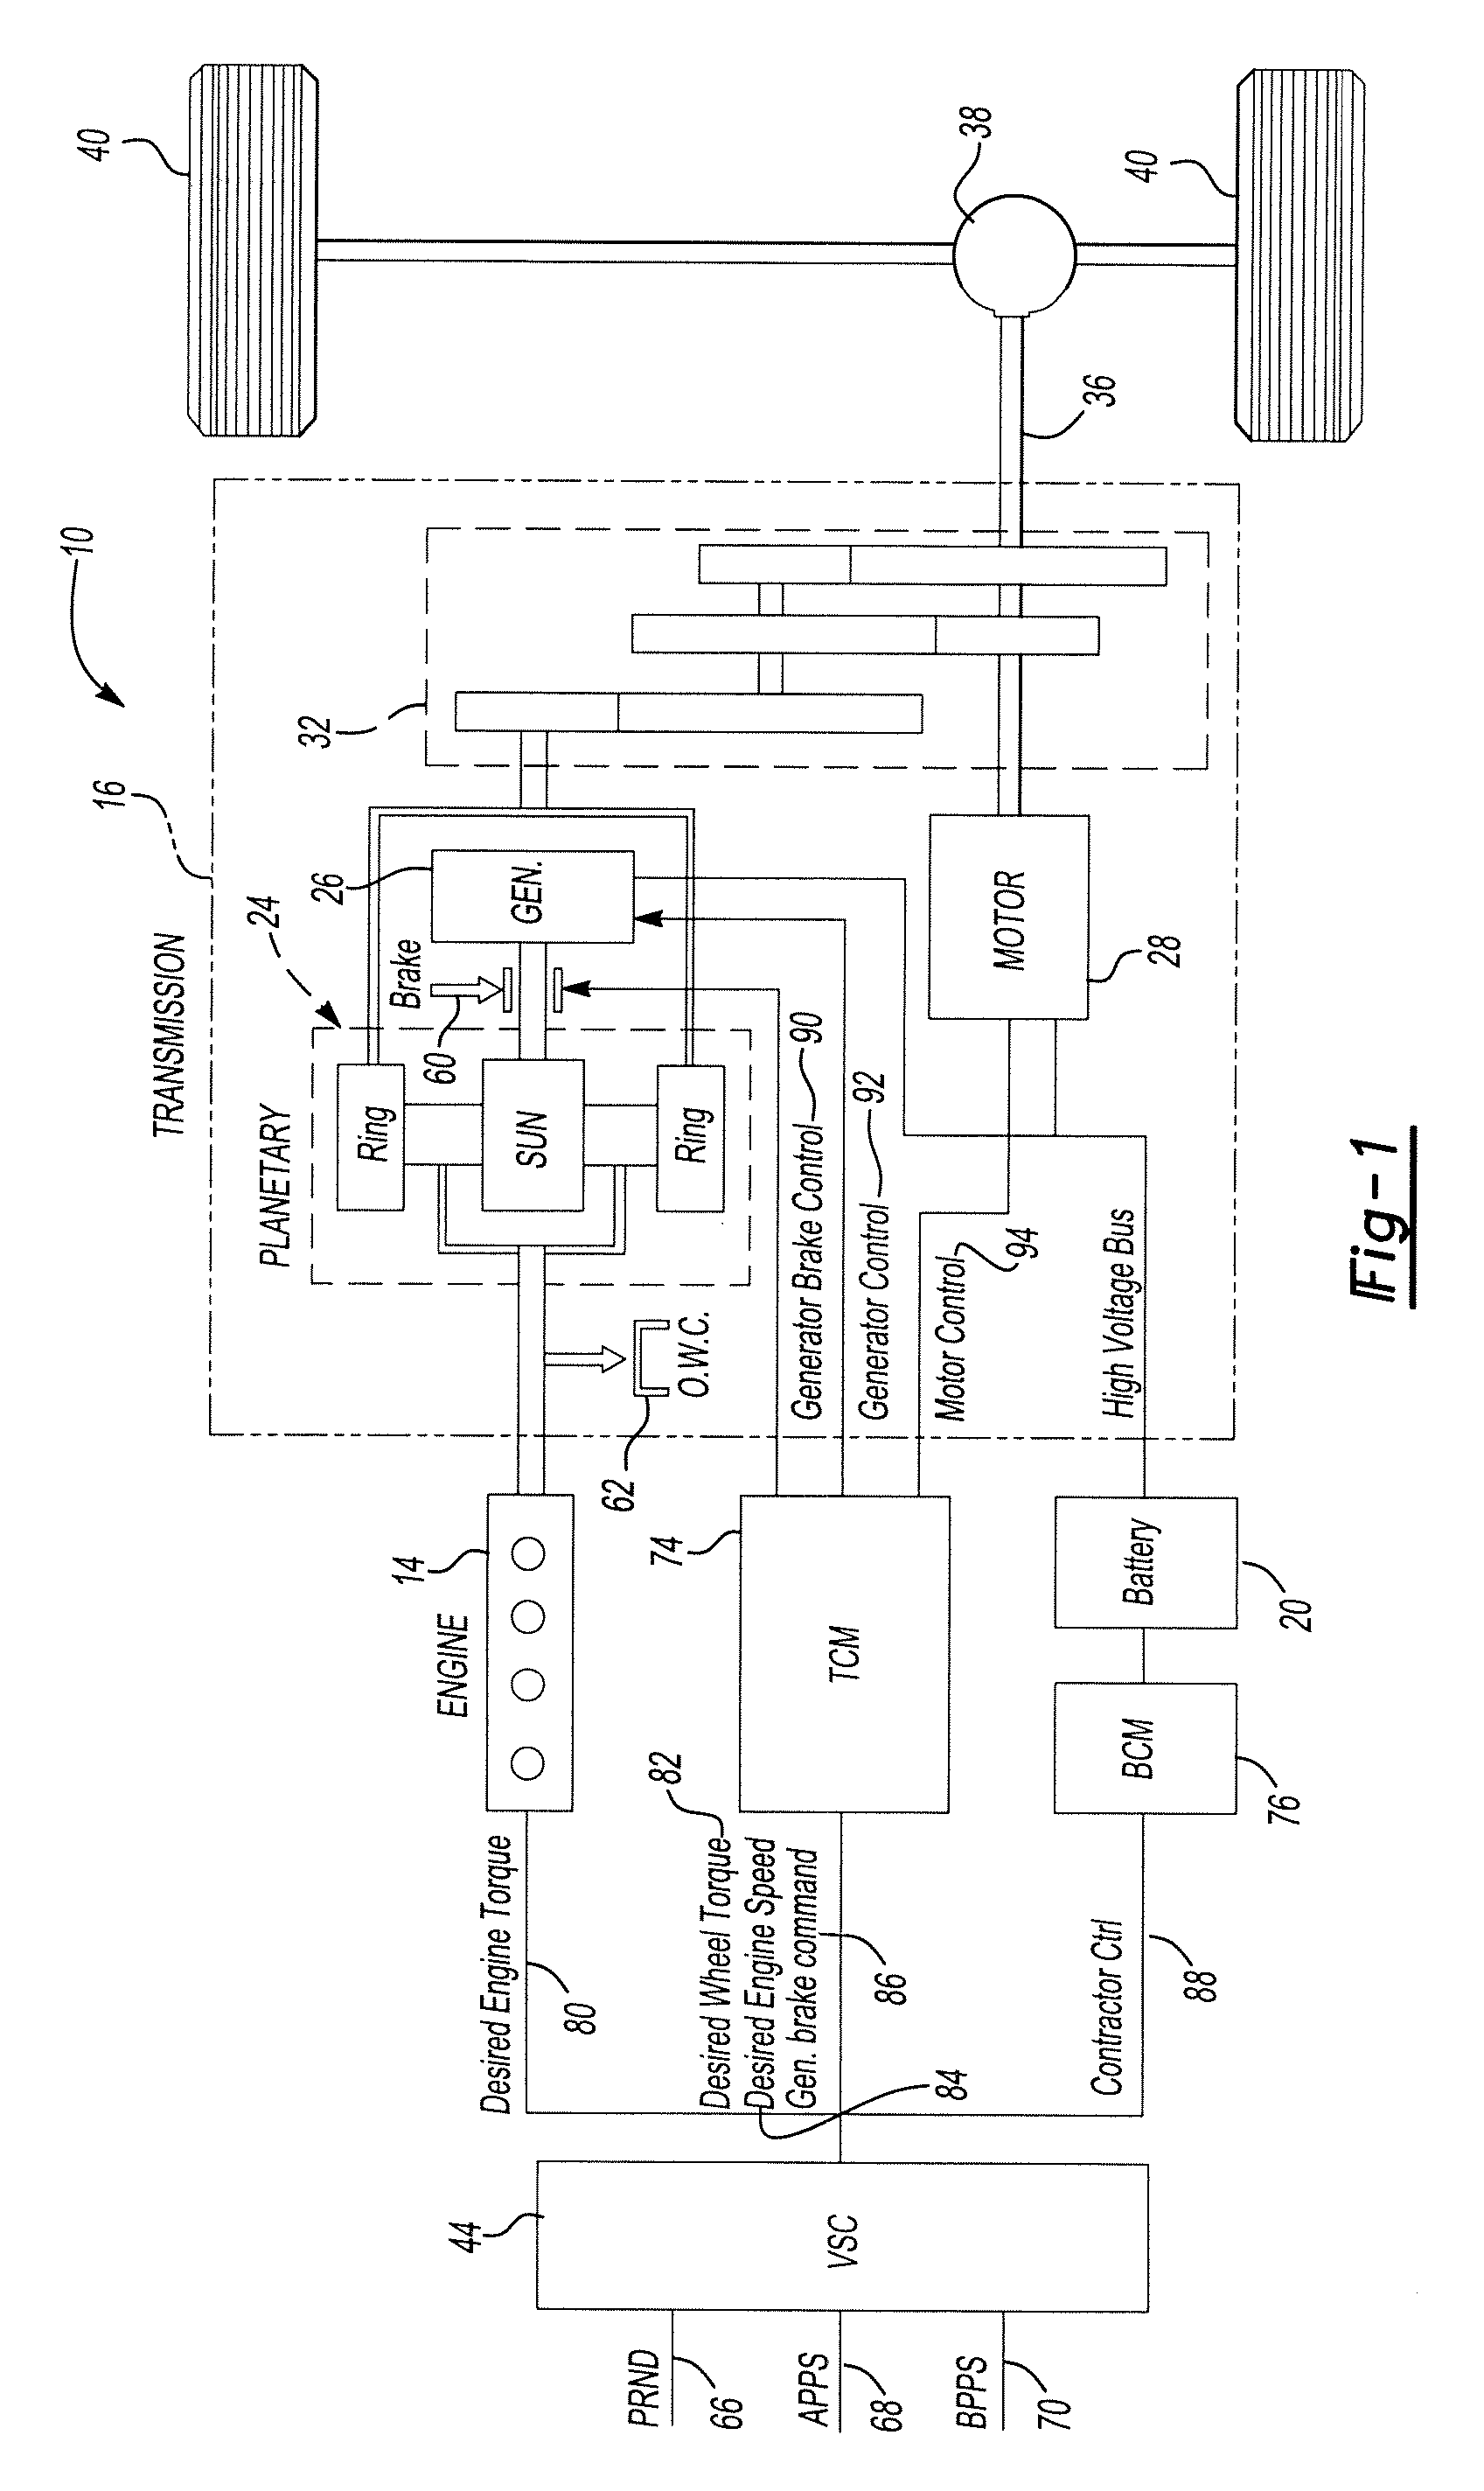 System and method for operating an electric motor by limiting performance